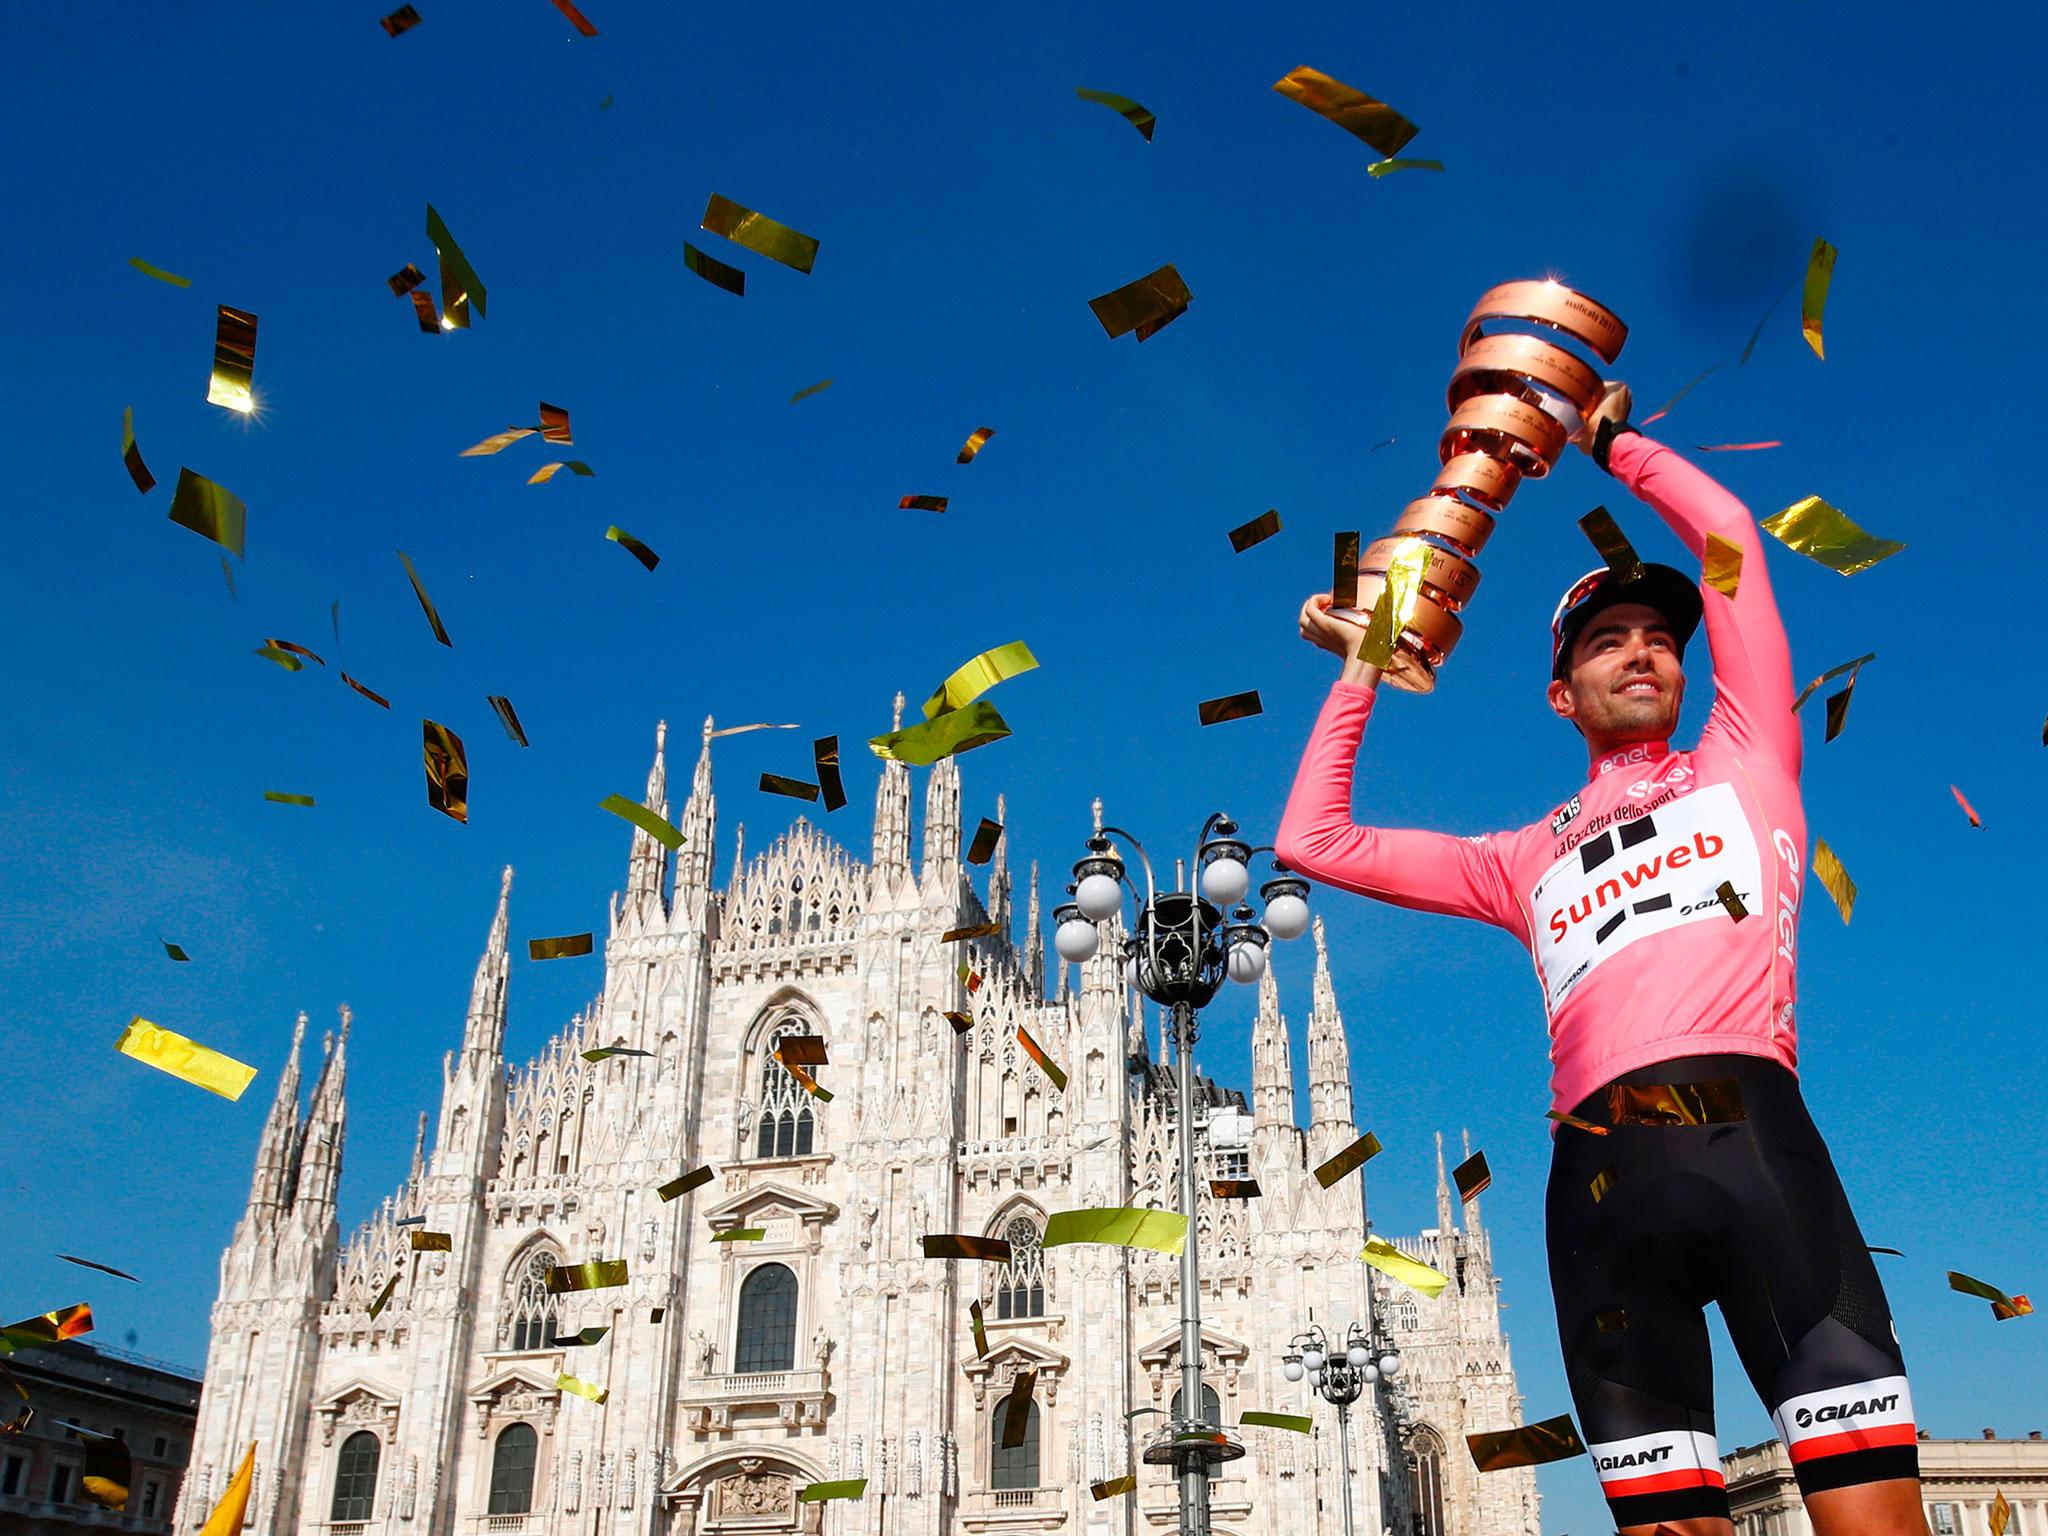 Tom Douholds lifts the trophy in the shadow of Milan's famous cathedral